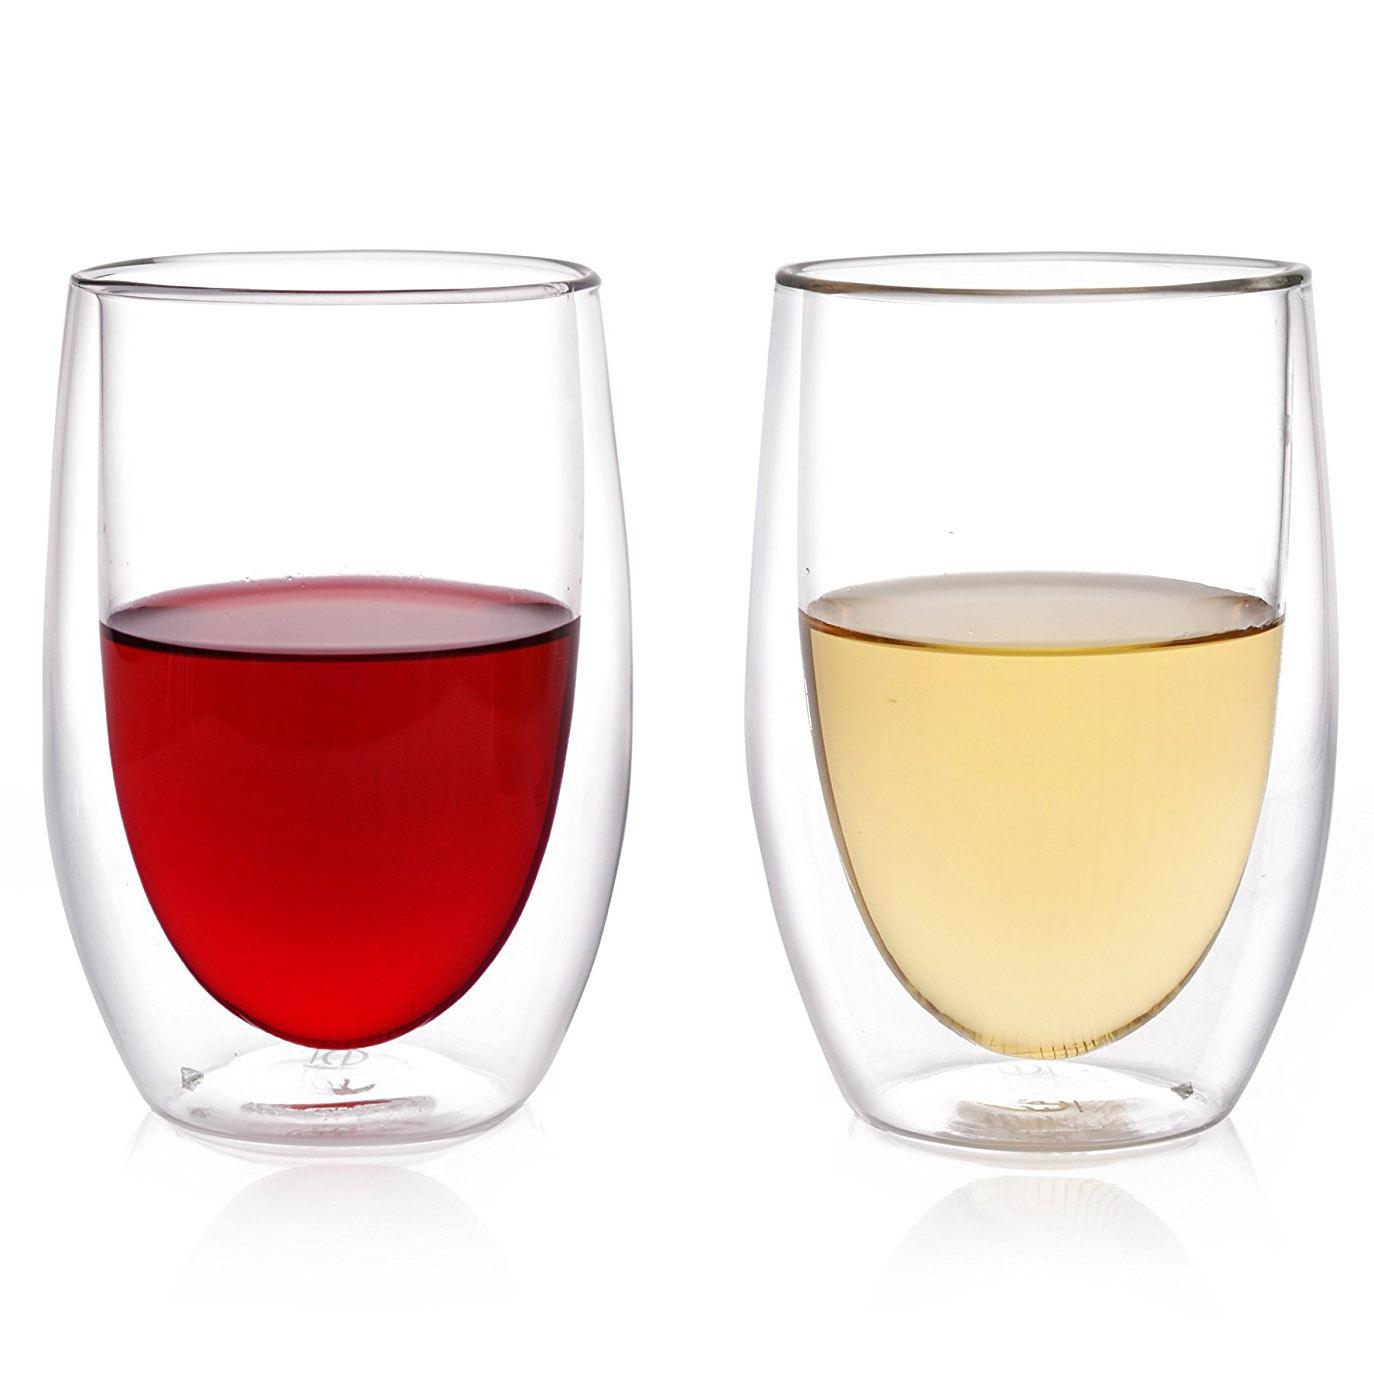 2x Epare Insulated Stemless Wine Glasses for $13.64